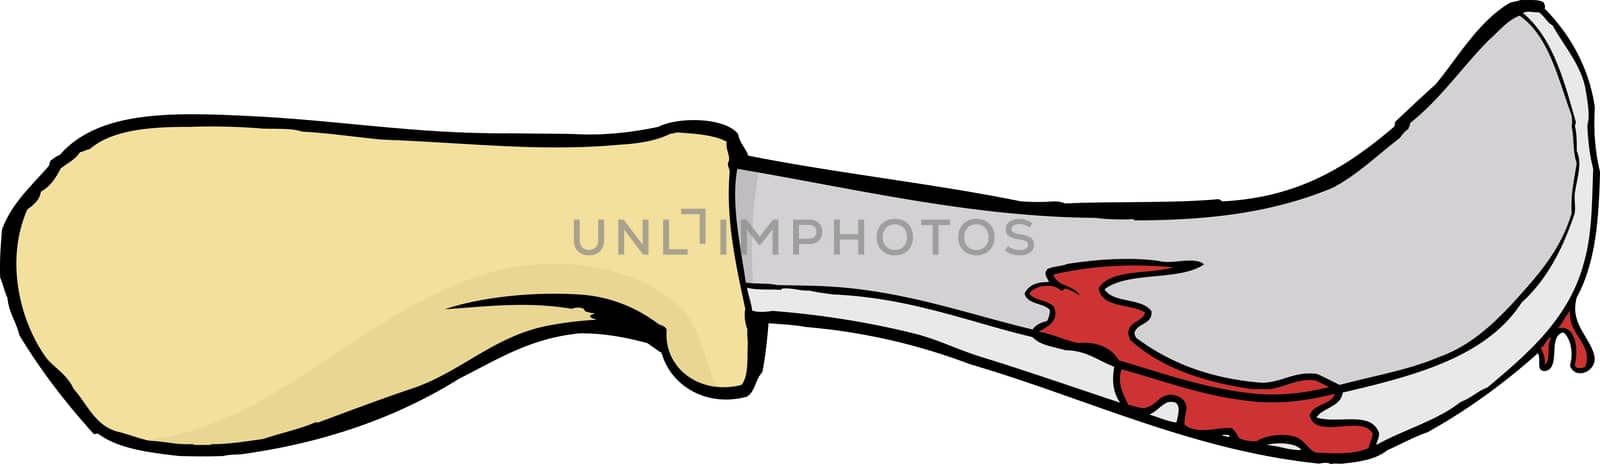 Blood stained skinning knife over white background